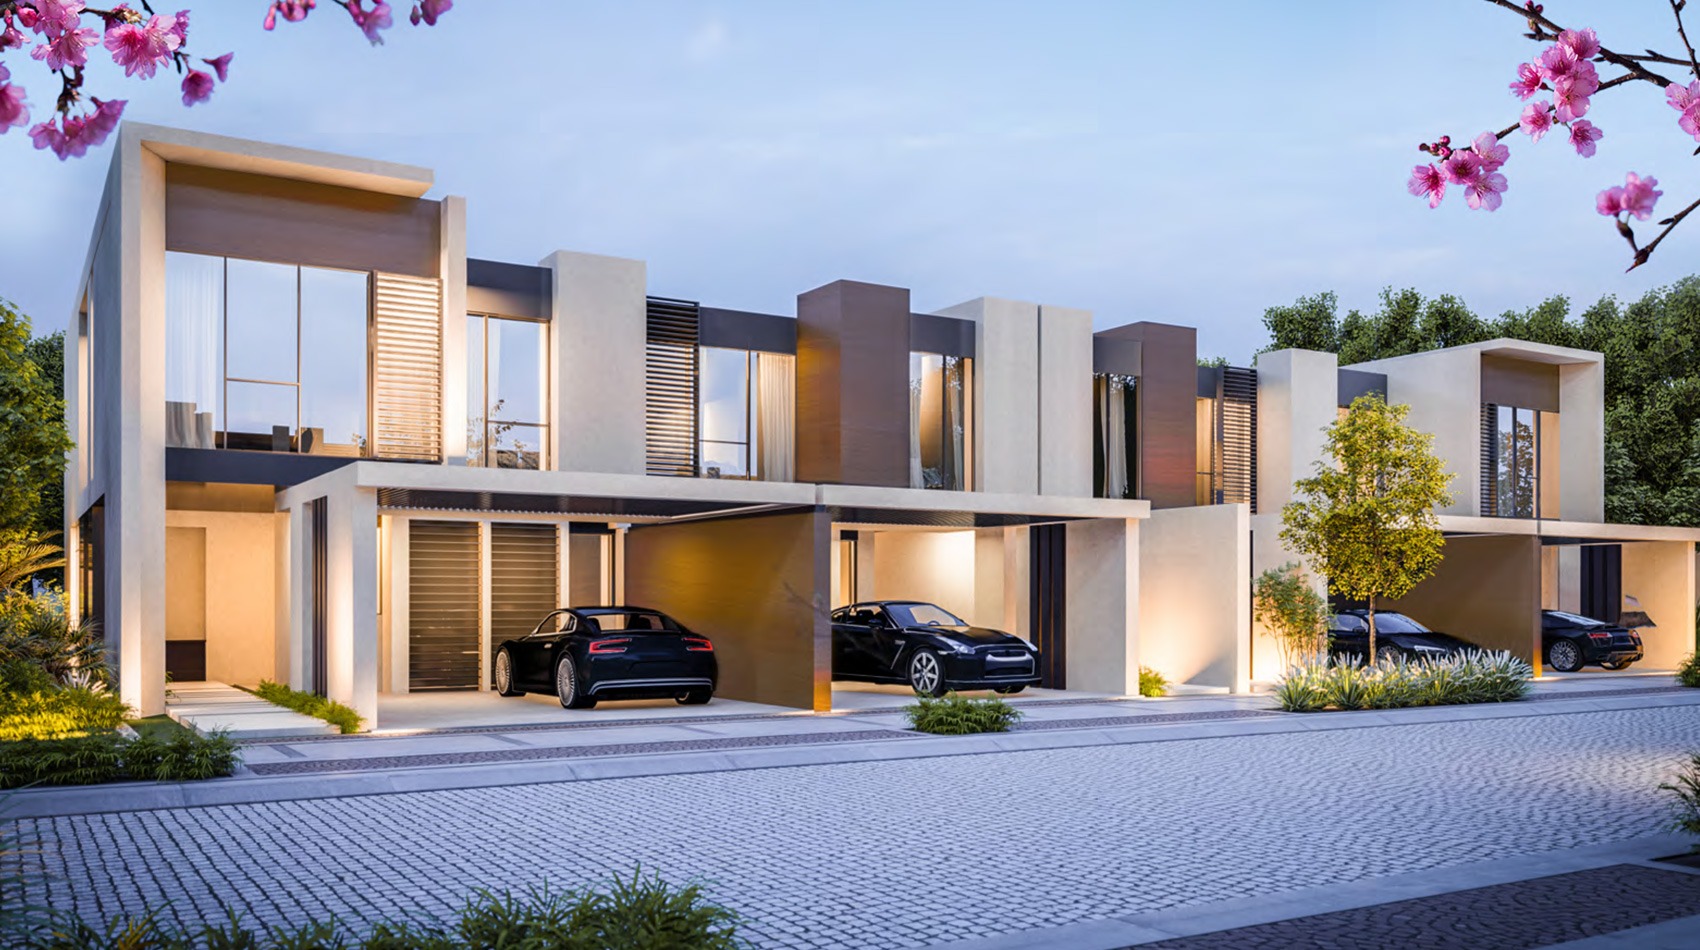 Townhouse for Selling in Dubai